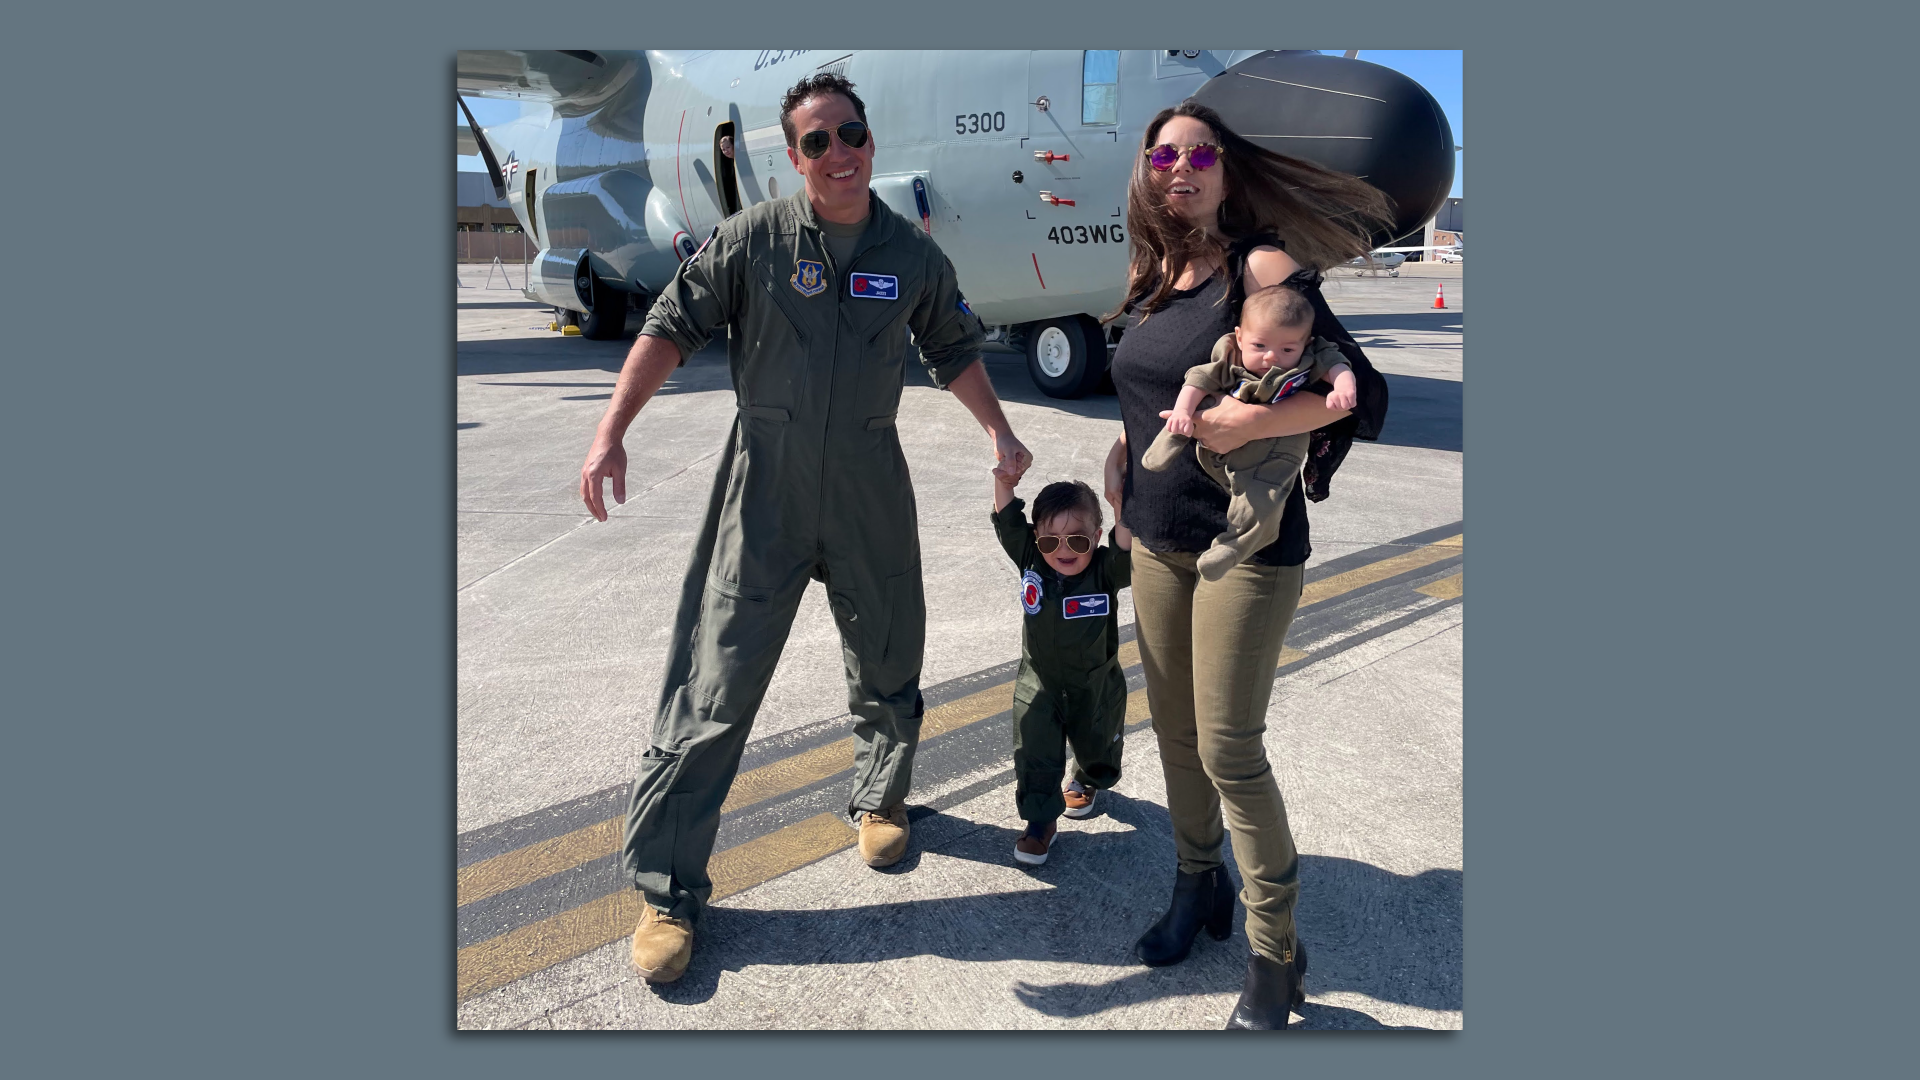 Photo shows the Gharby family smiling in front of a Hurricane Hunter WC-130. Dad and the two children are wearing matching flight suits.